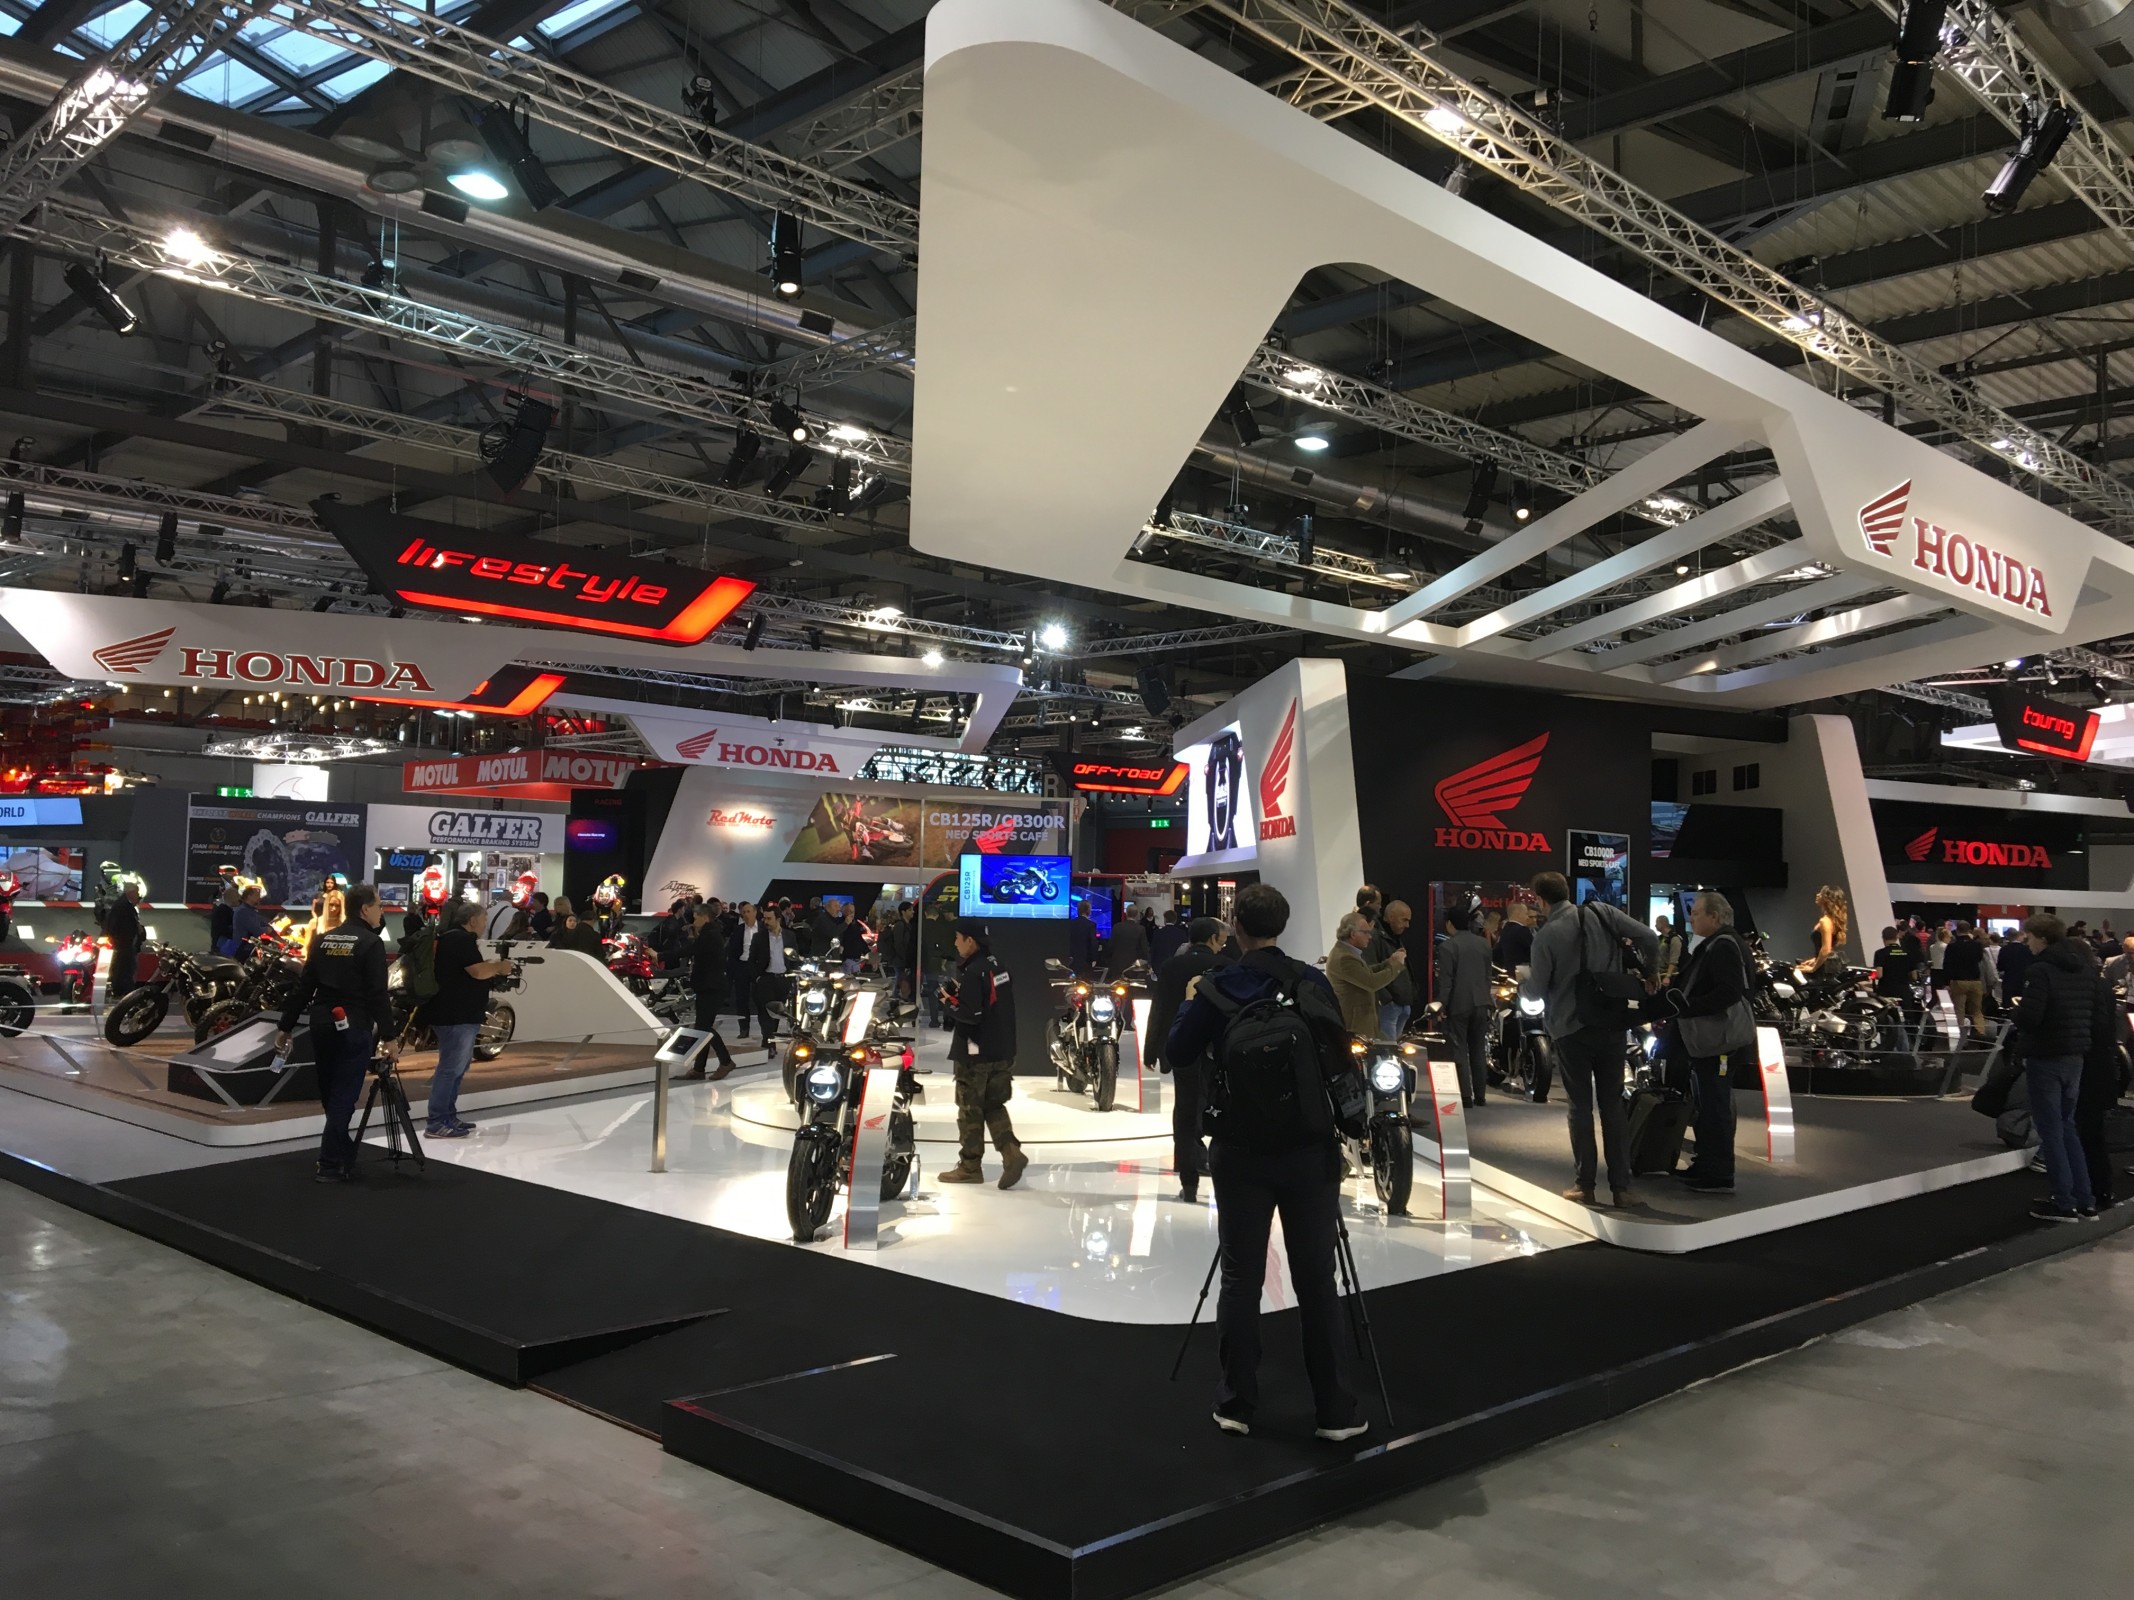 Gallery EICMA Motorcycle Show Racer X Online